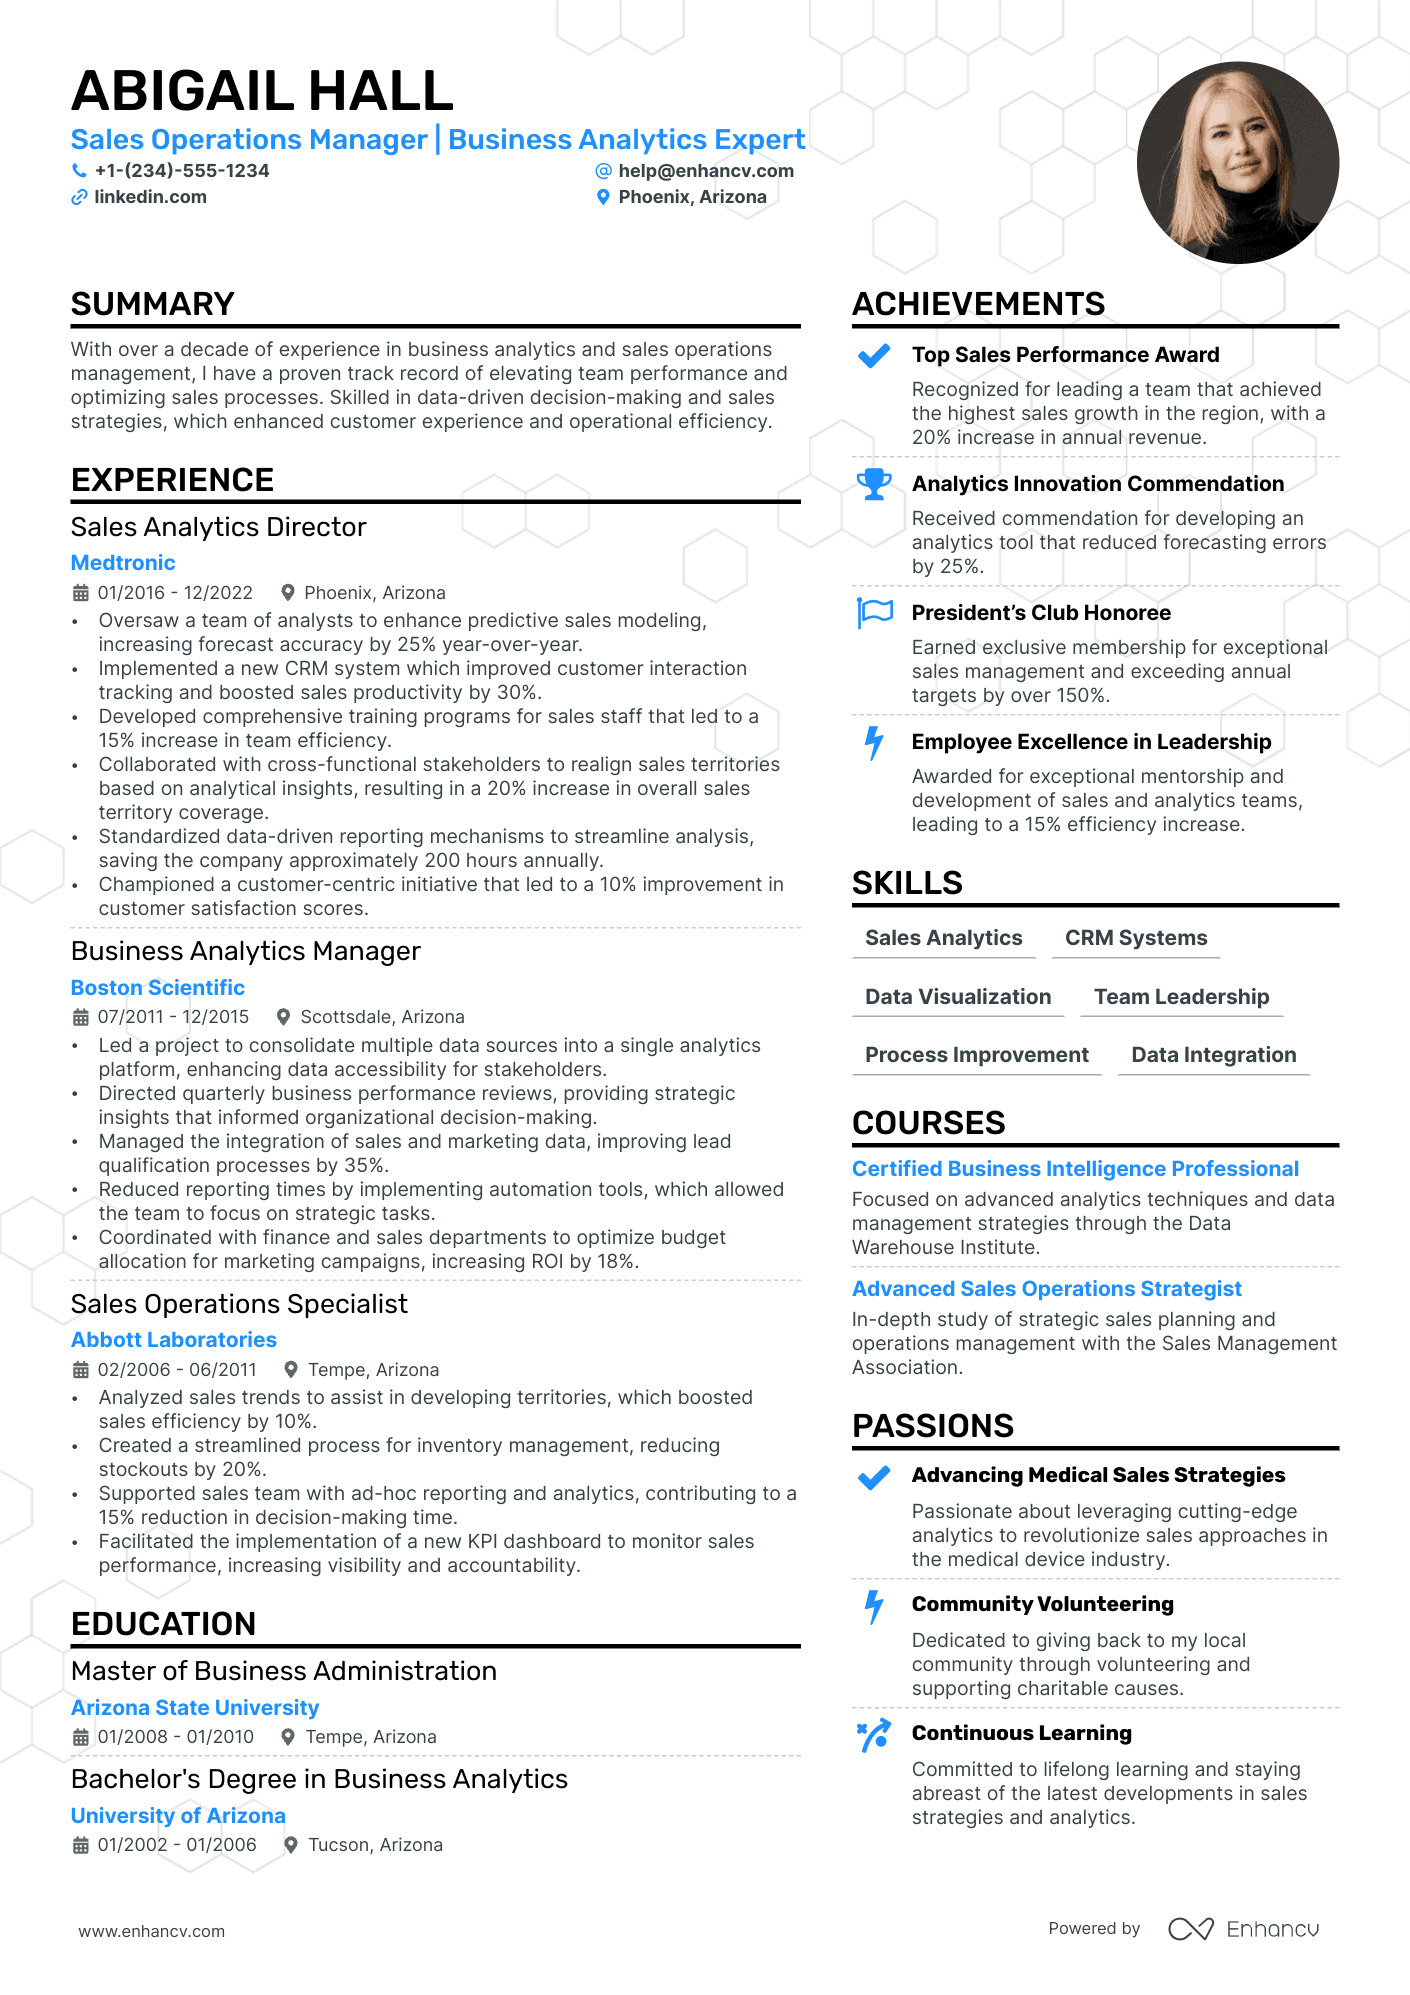 Sales Operations Manager resume example